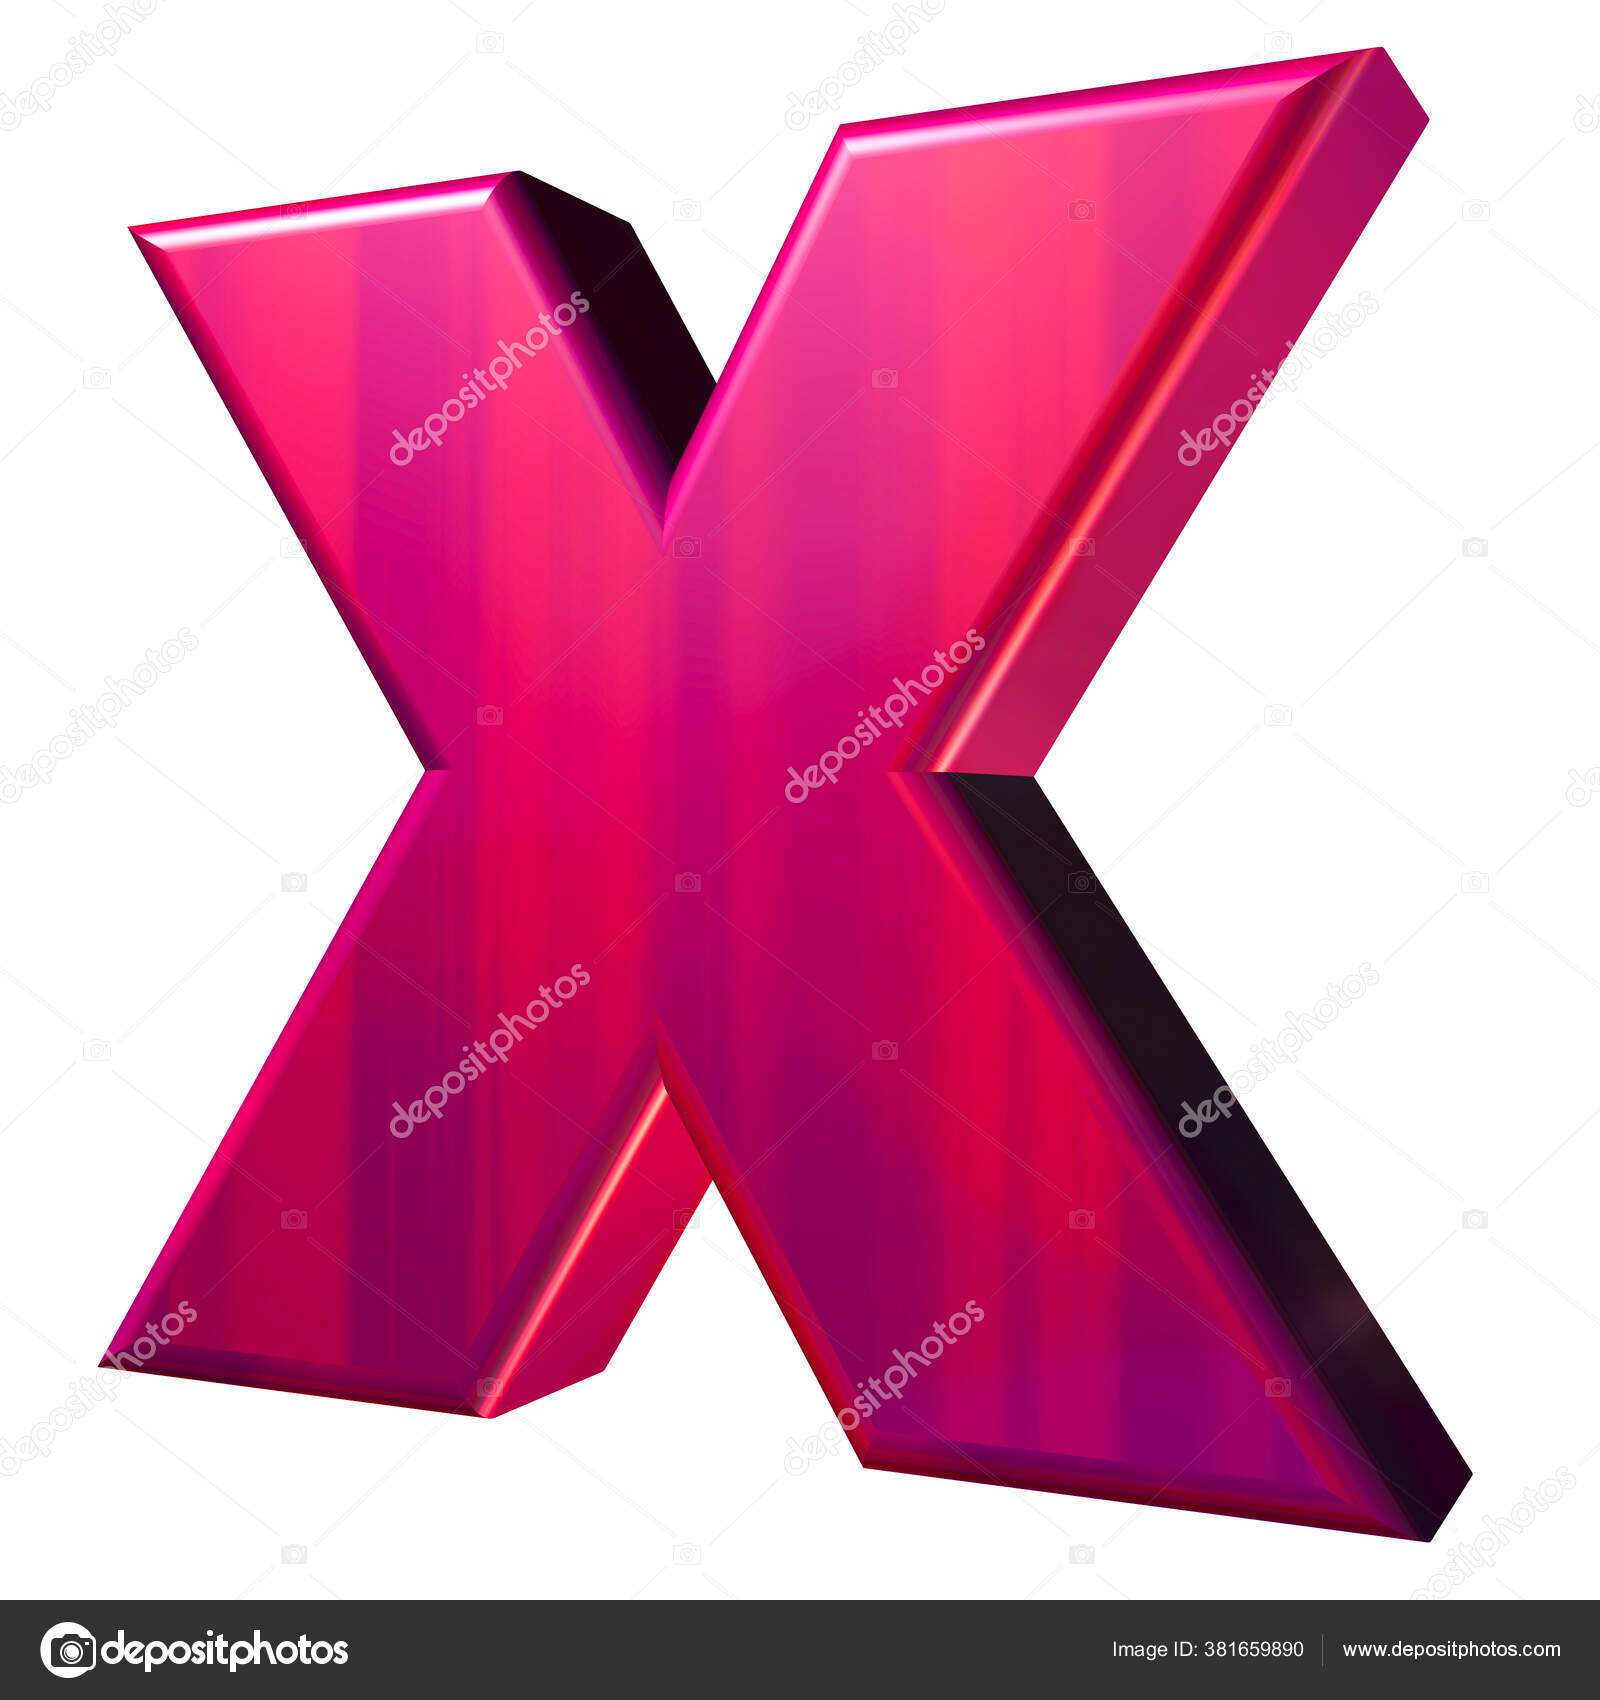 7 023 Letter X Stock Photos Images Download Letter X Pictures On Depositphotos